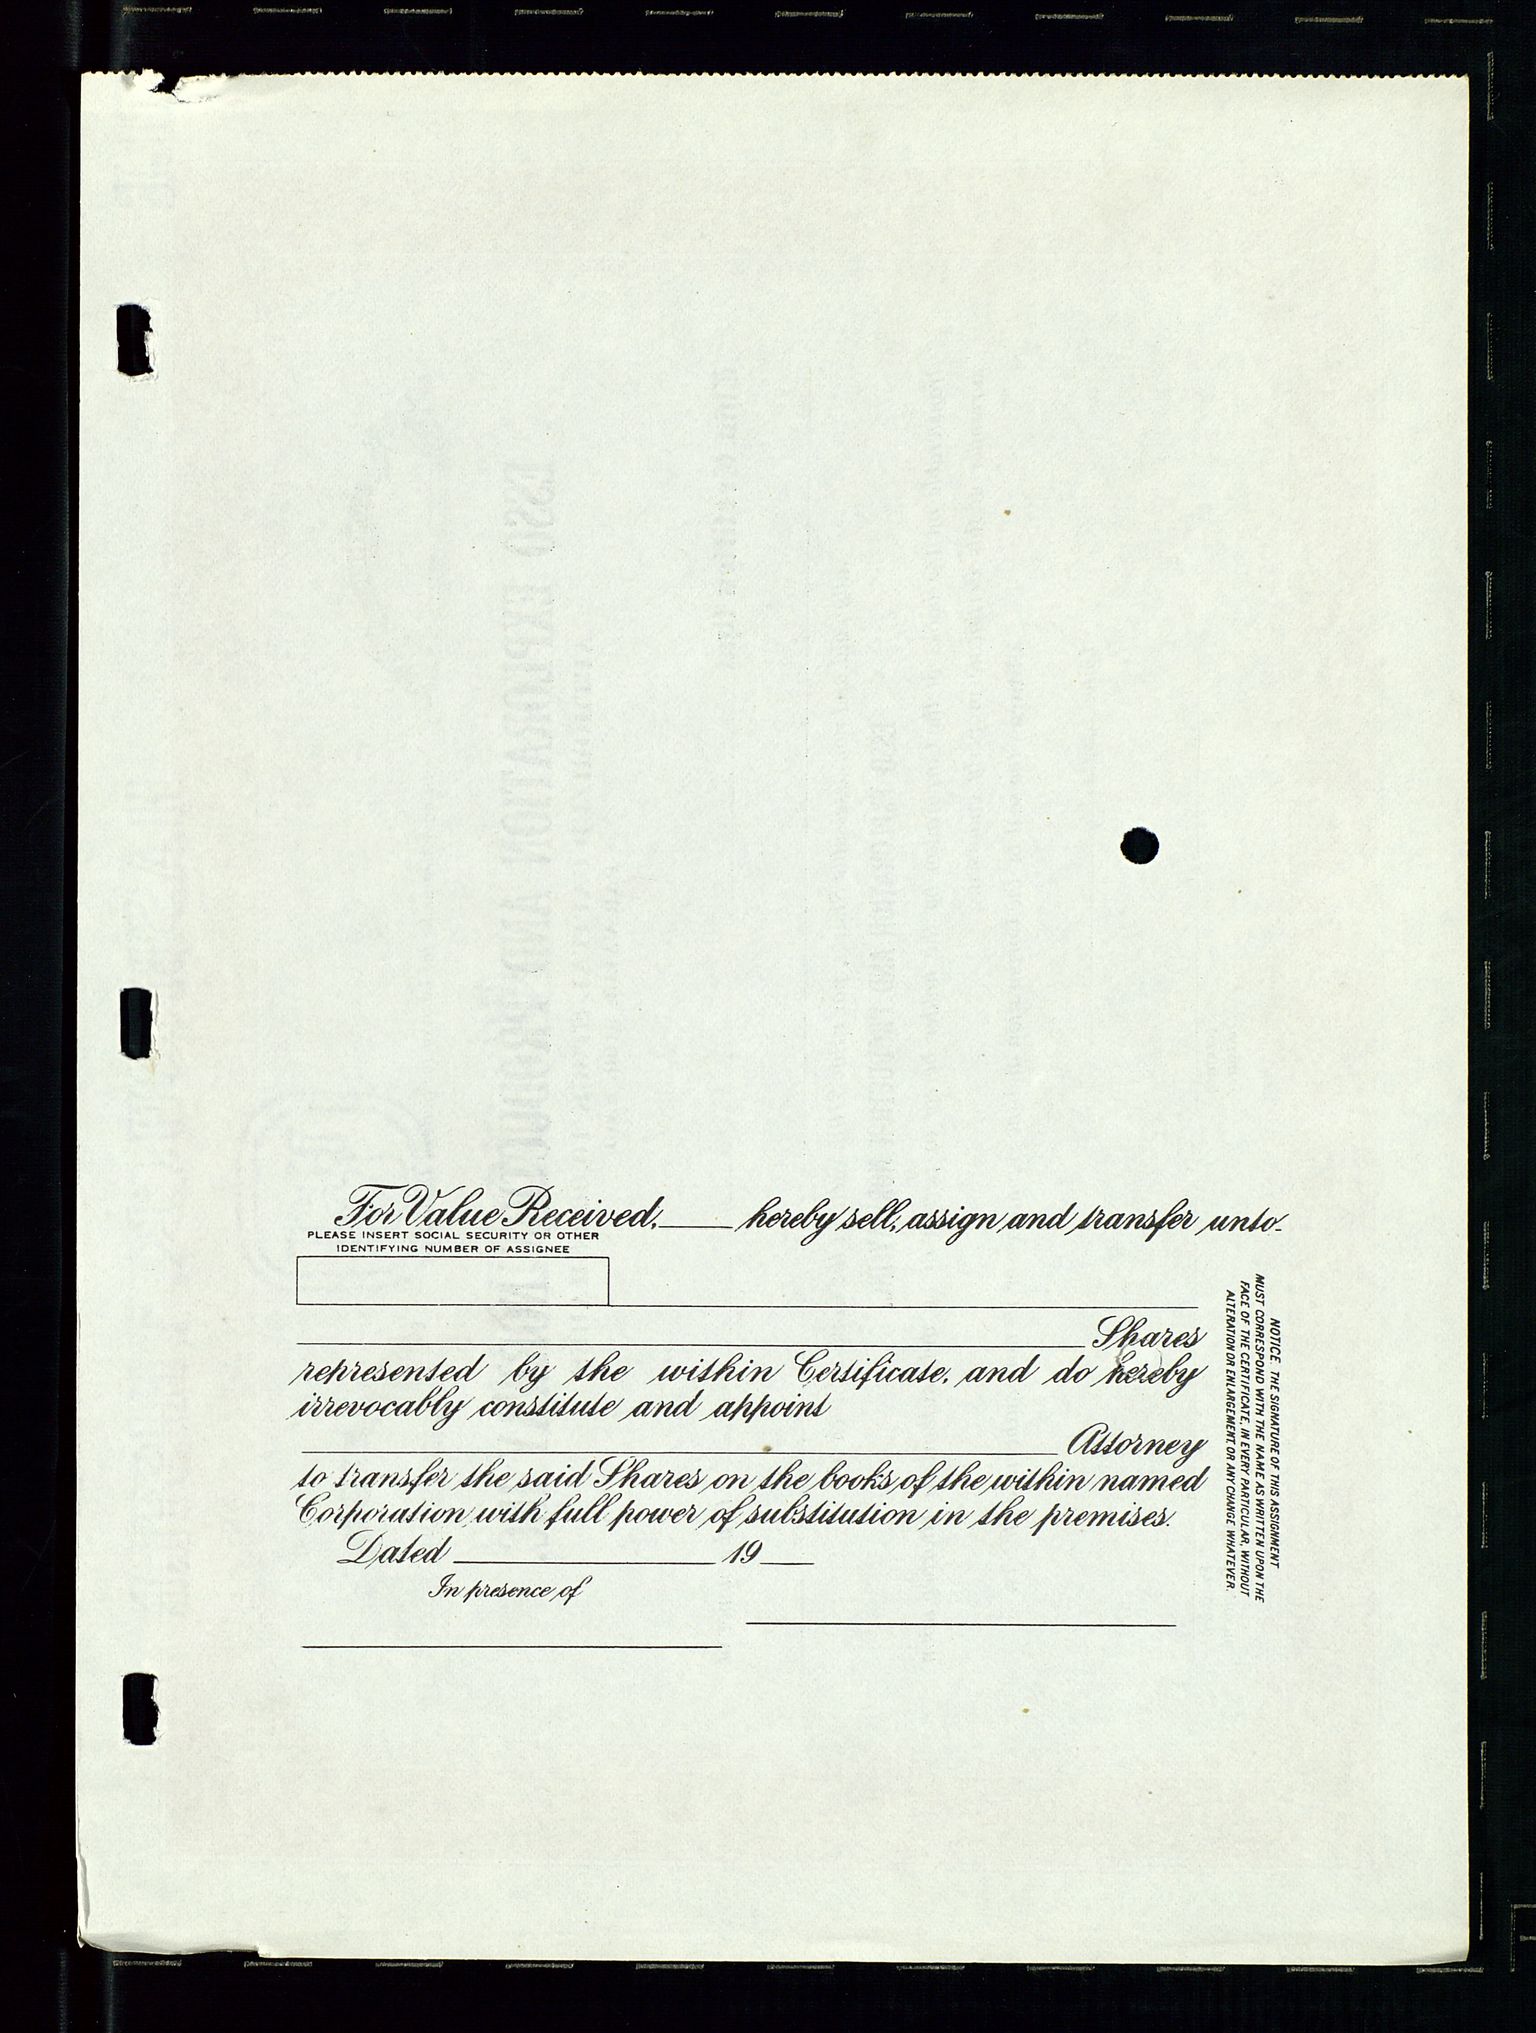 Pa 1512 - Esso Exploration and Production Norway Inc., SAST/A-101917/A/Aa/L0001/0002: Styredokumenter / Corporate records, Board meeting minutes, Agreements, Stocholder meetings, 1975-1979, p. 24